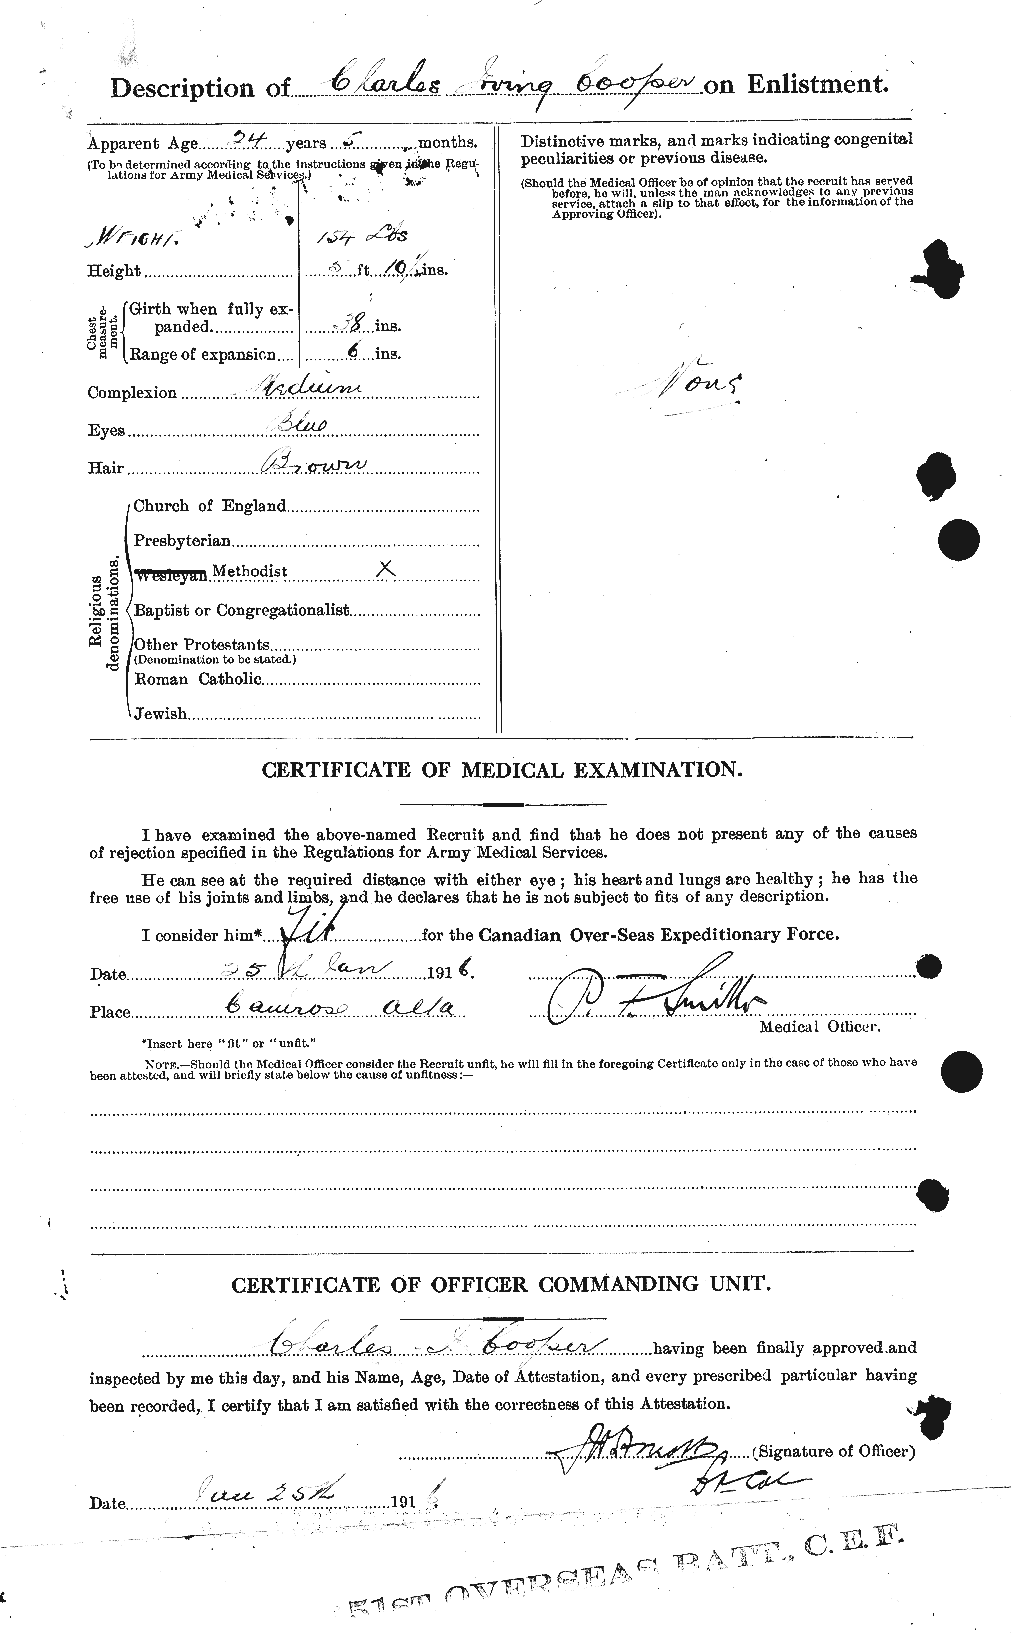 Personnel Records of the First World War - CEF 054244b